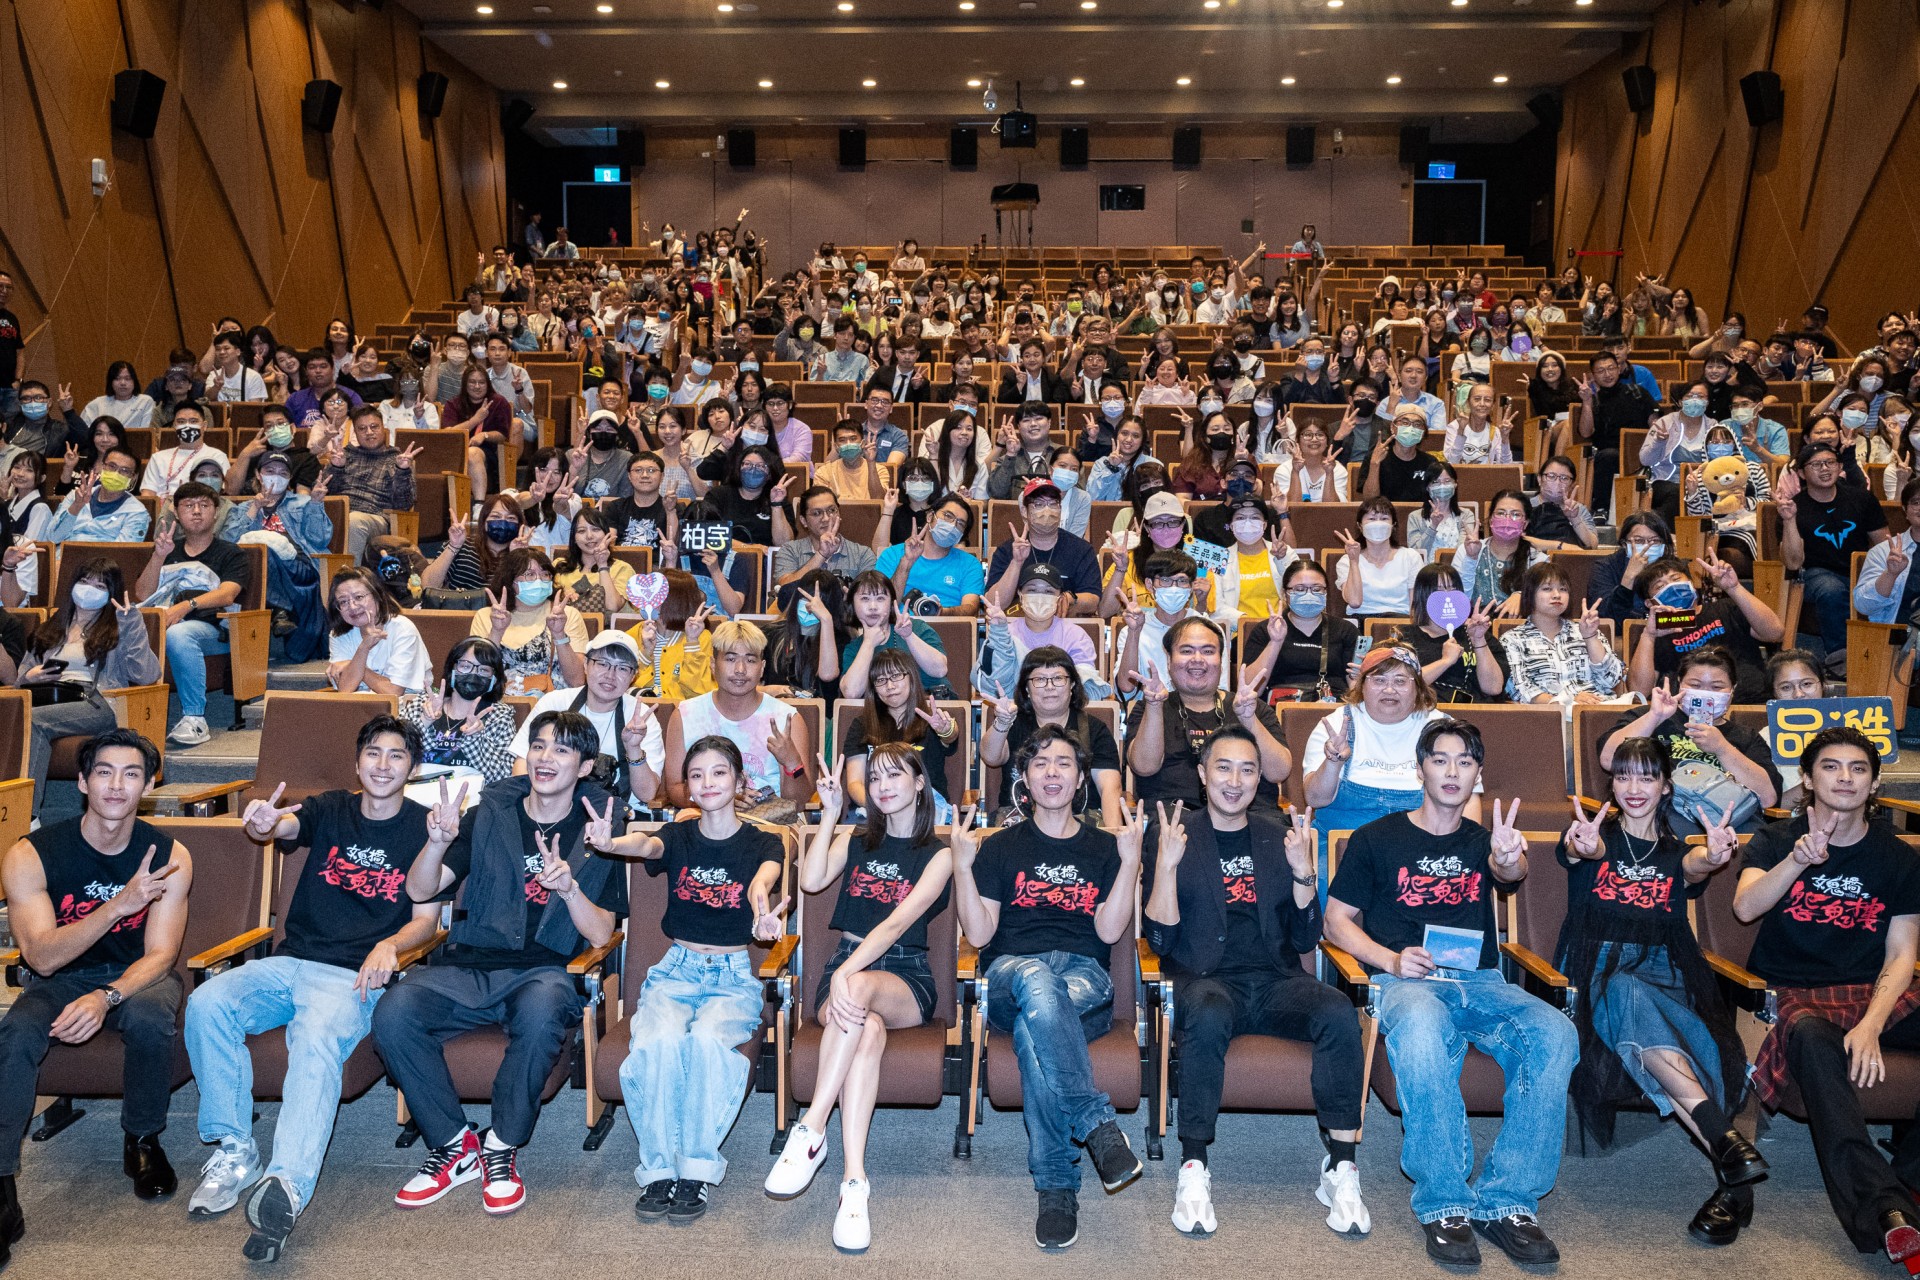 2023 KFF sets new box office record as 30,000 film buffs gather in Kaohsiung-Image